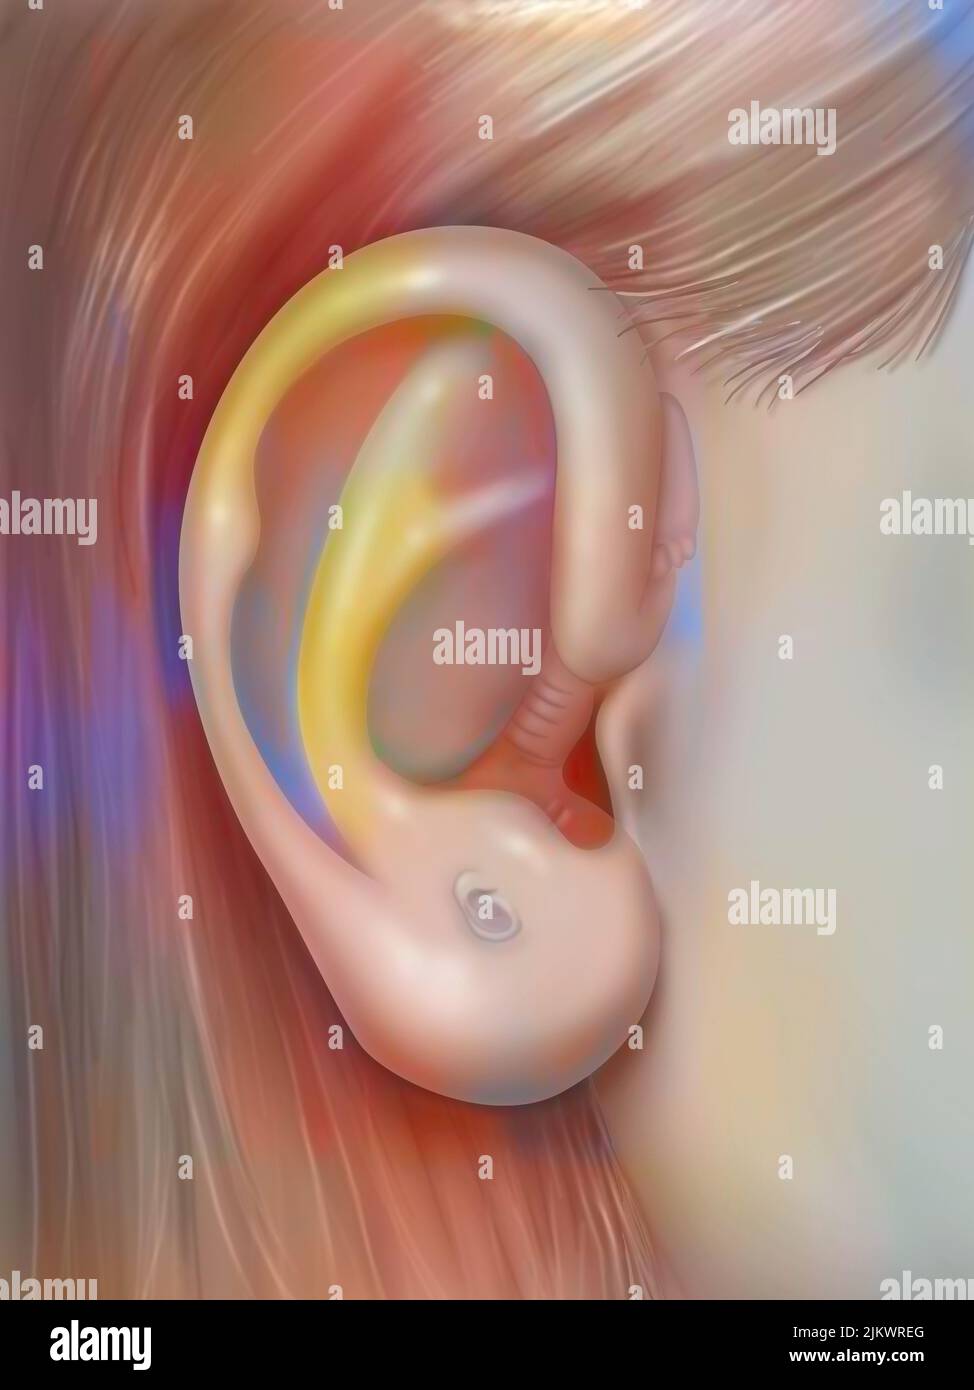 Auriculotherapy: ear and evidence of its resemblance to a fetus. Stock Photo